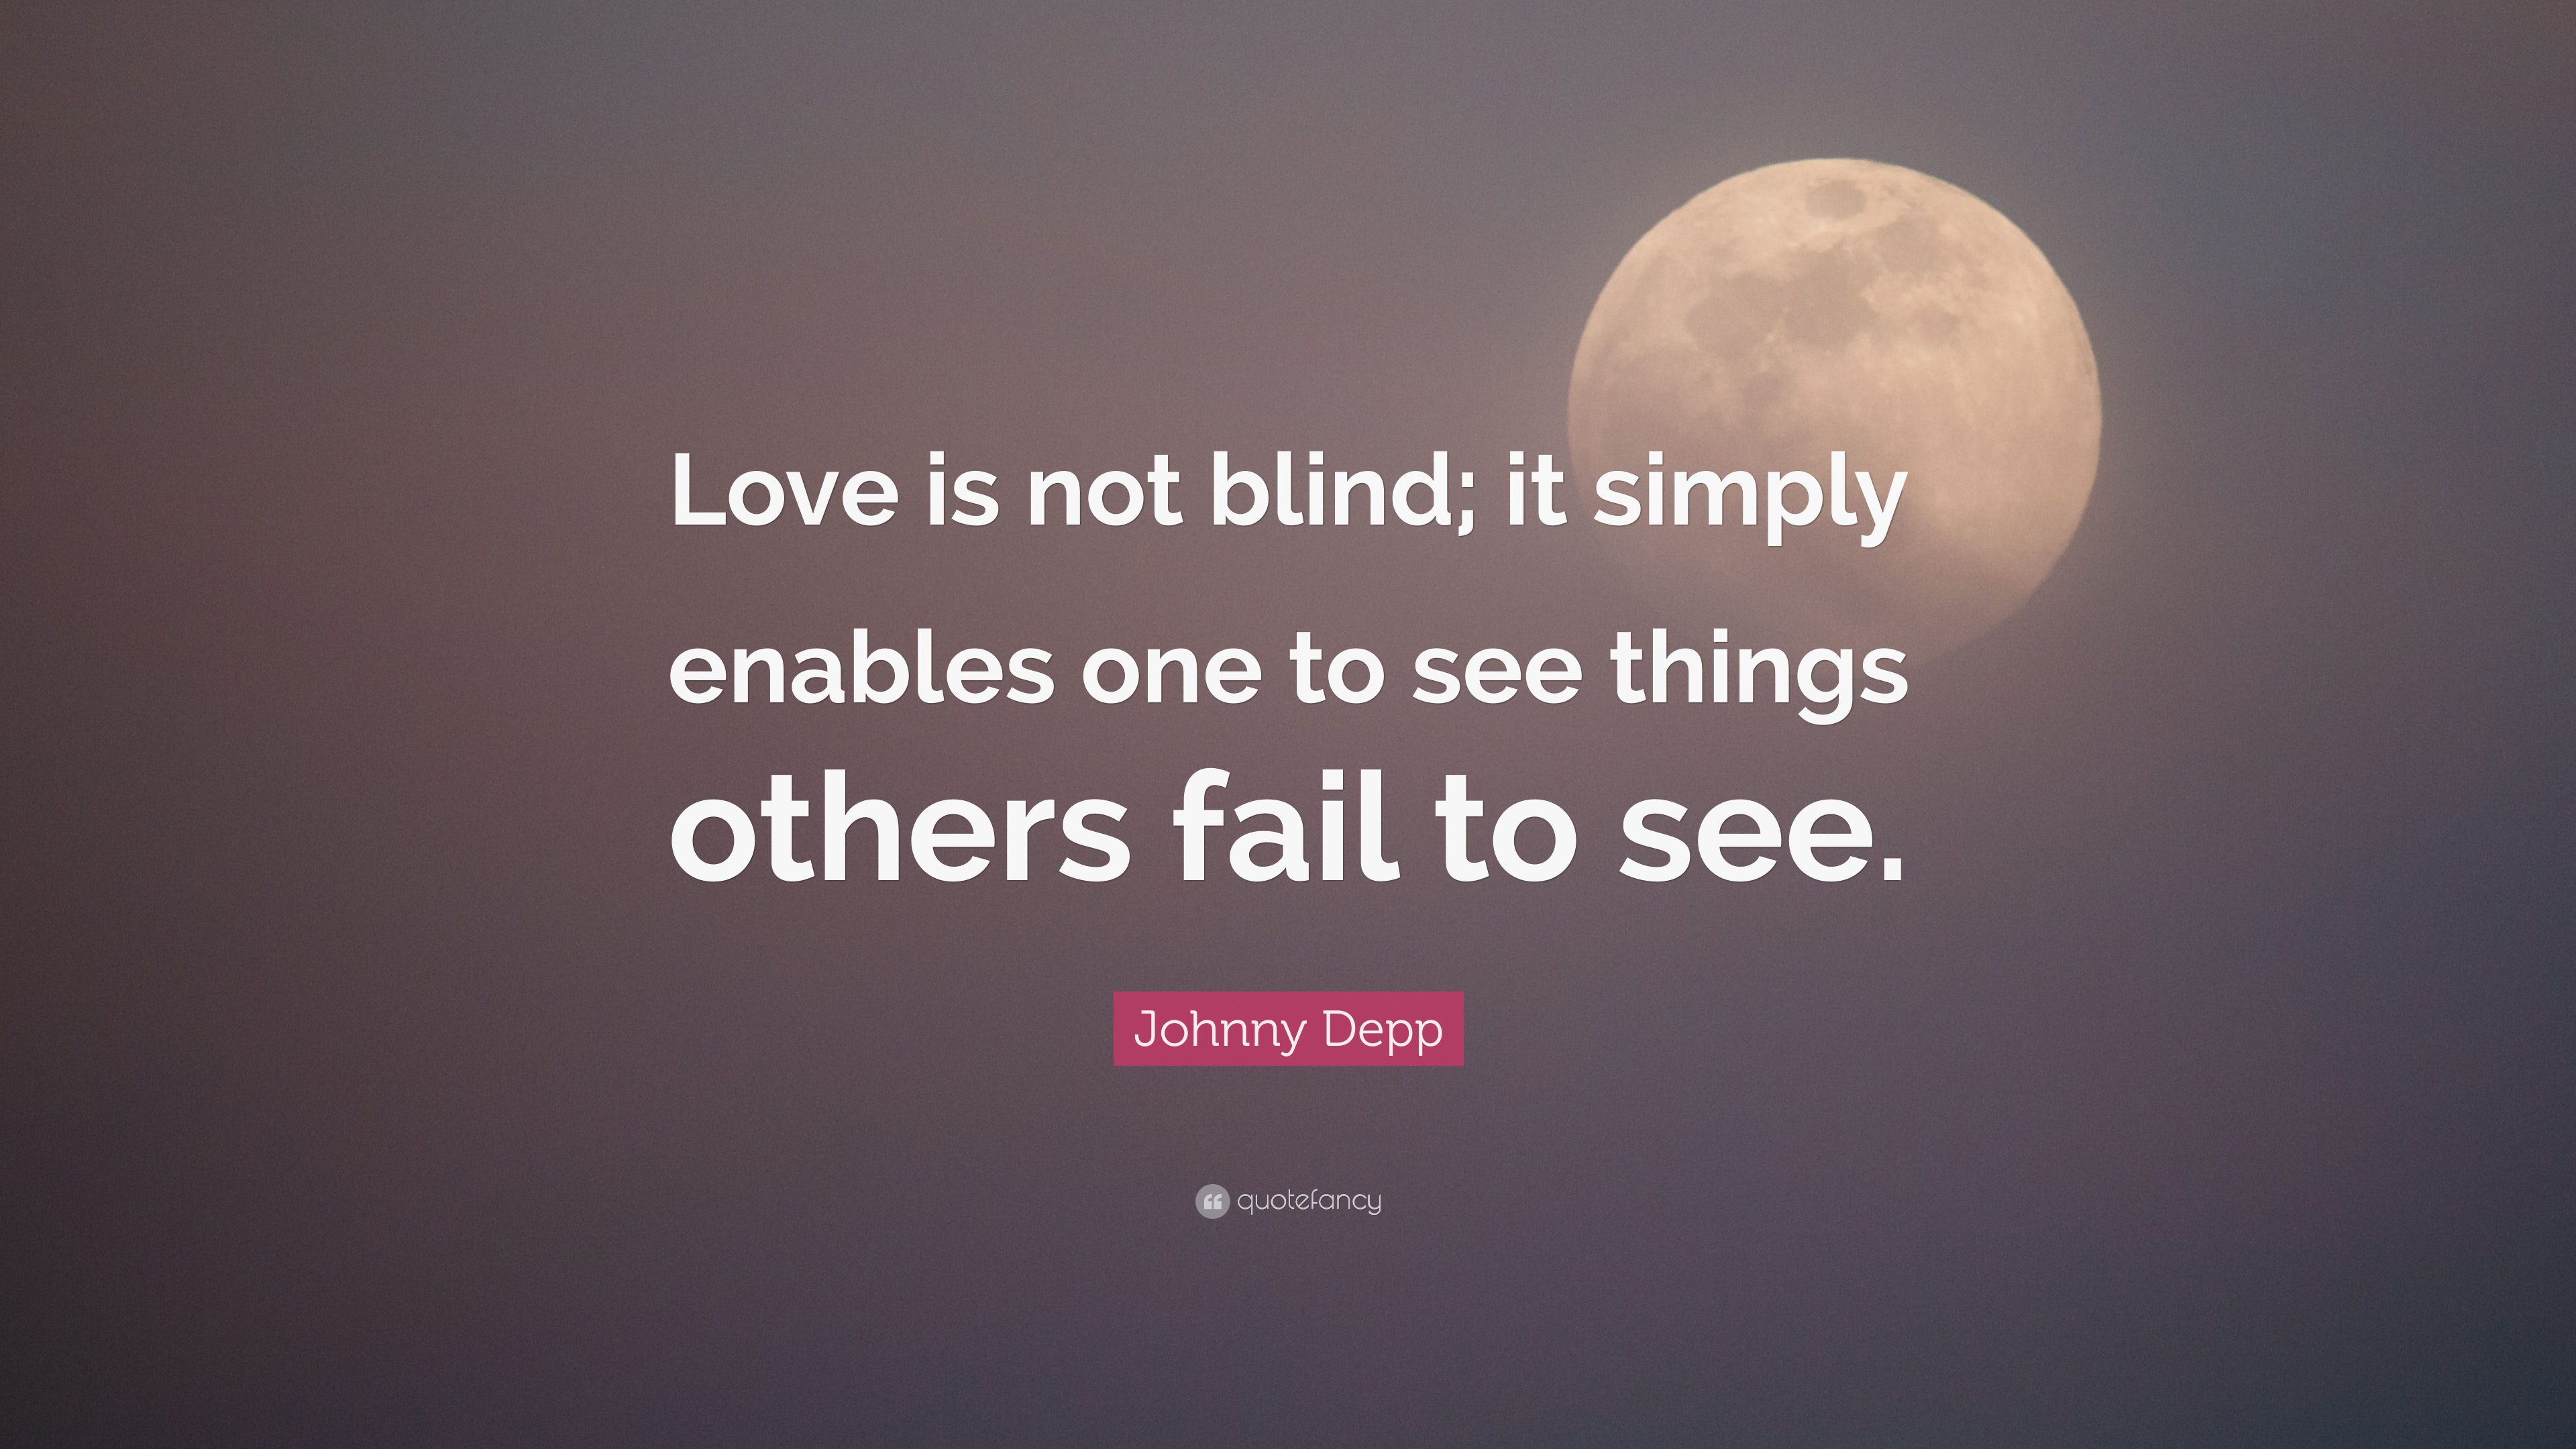 Johnny Depp Quote: “Love is not blind; it simply enables one to